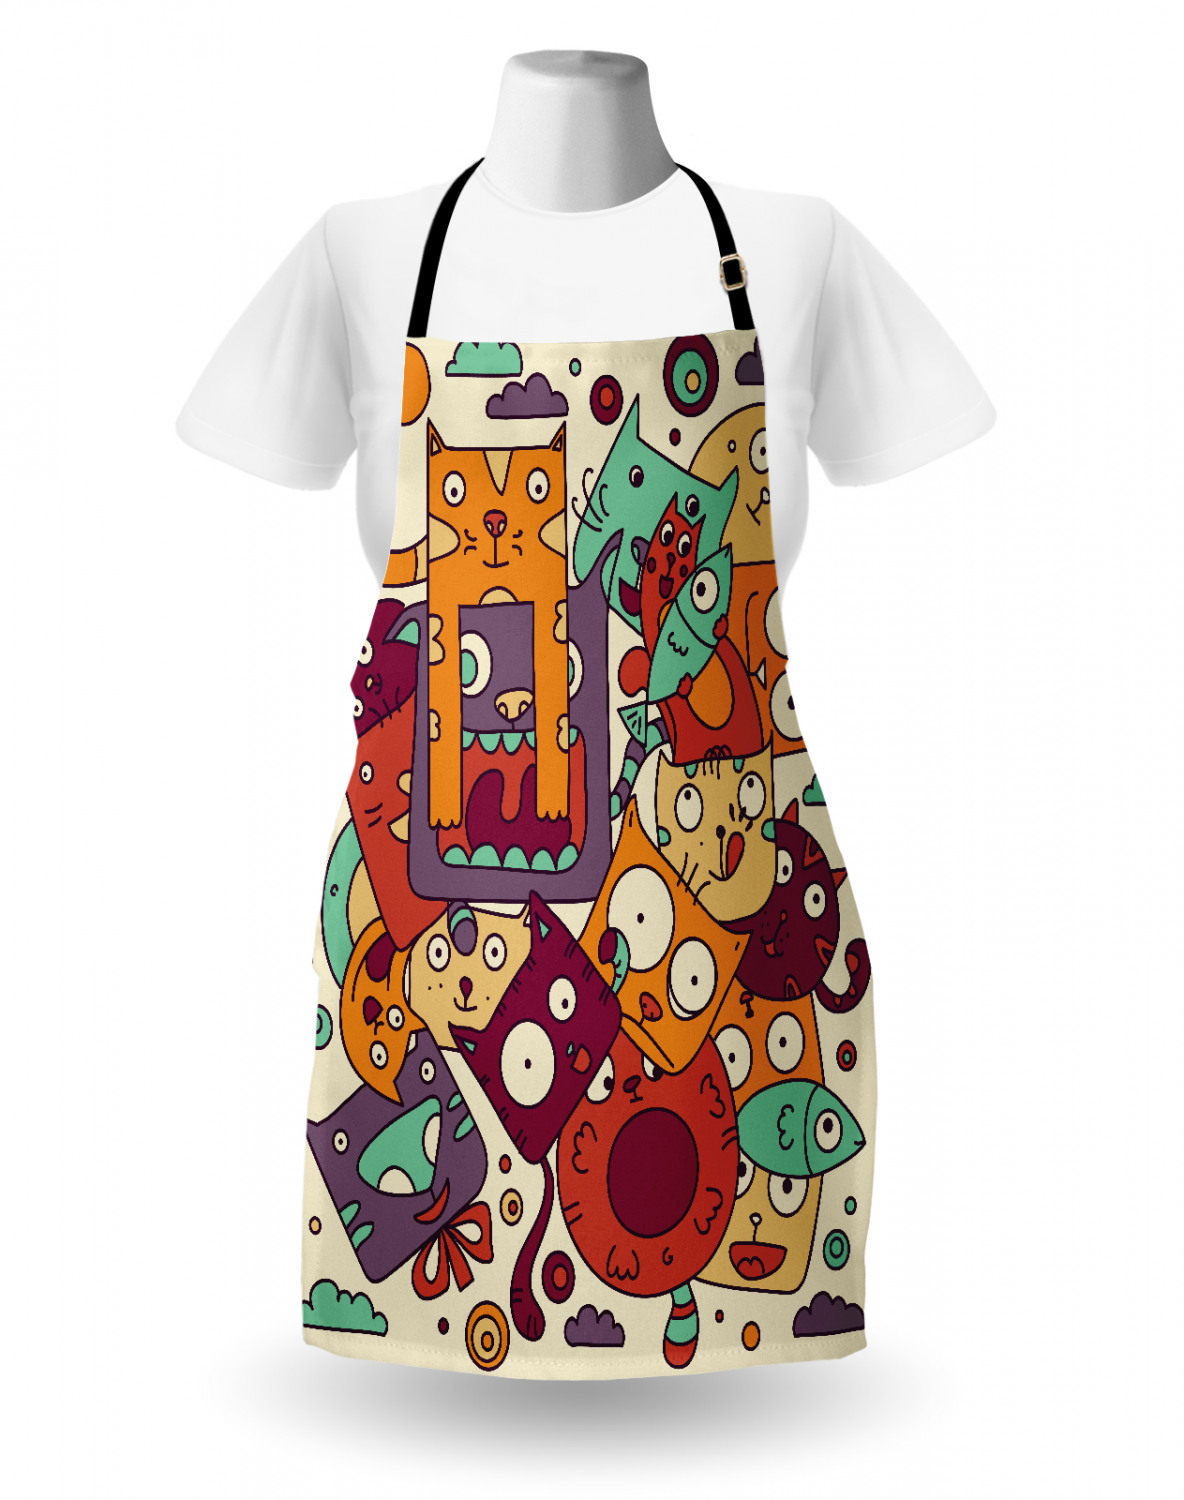 Apron Unisex Kitchen Bib with Adjustable Neck for Cooking by Ambesonne 